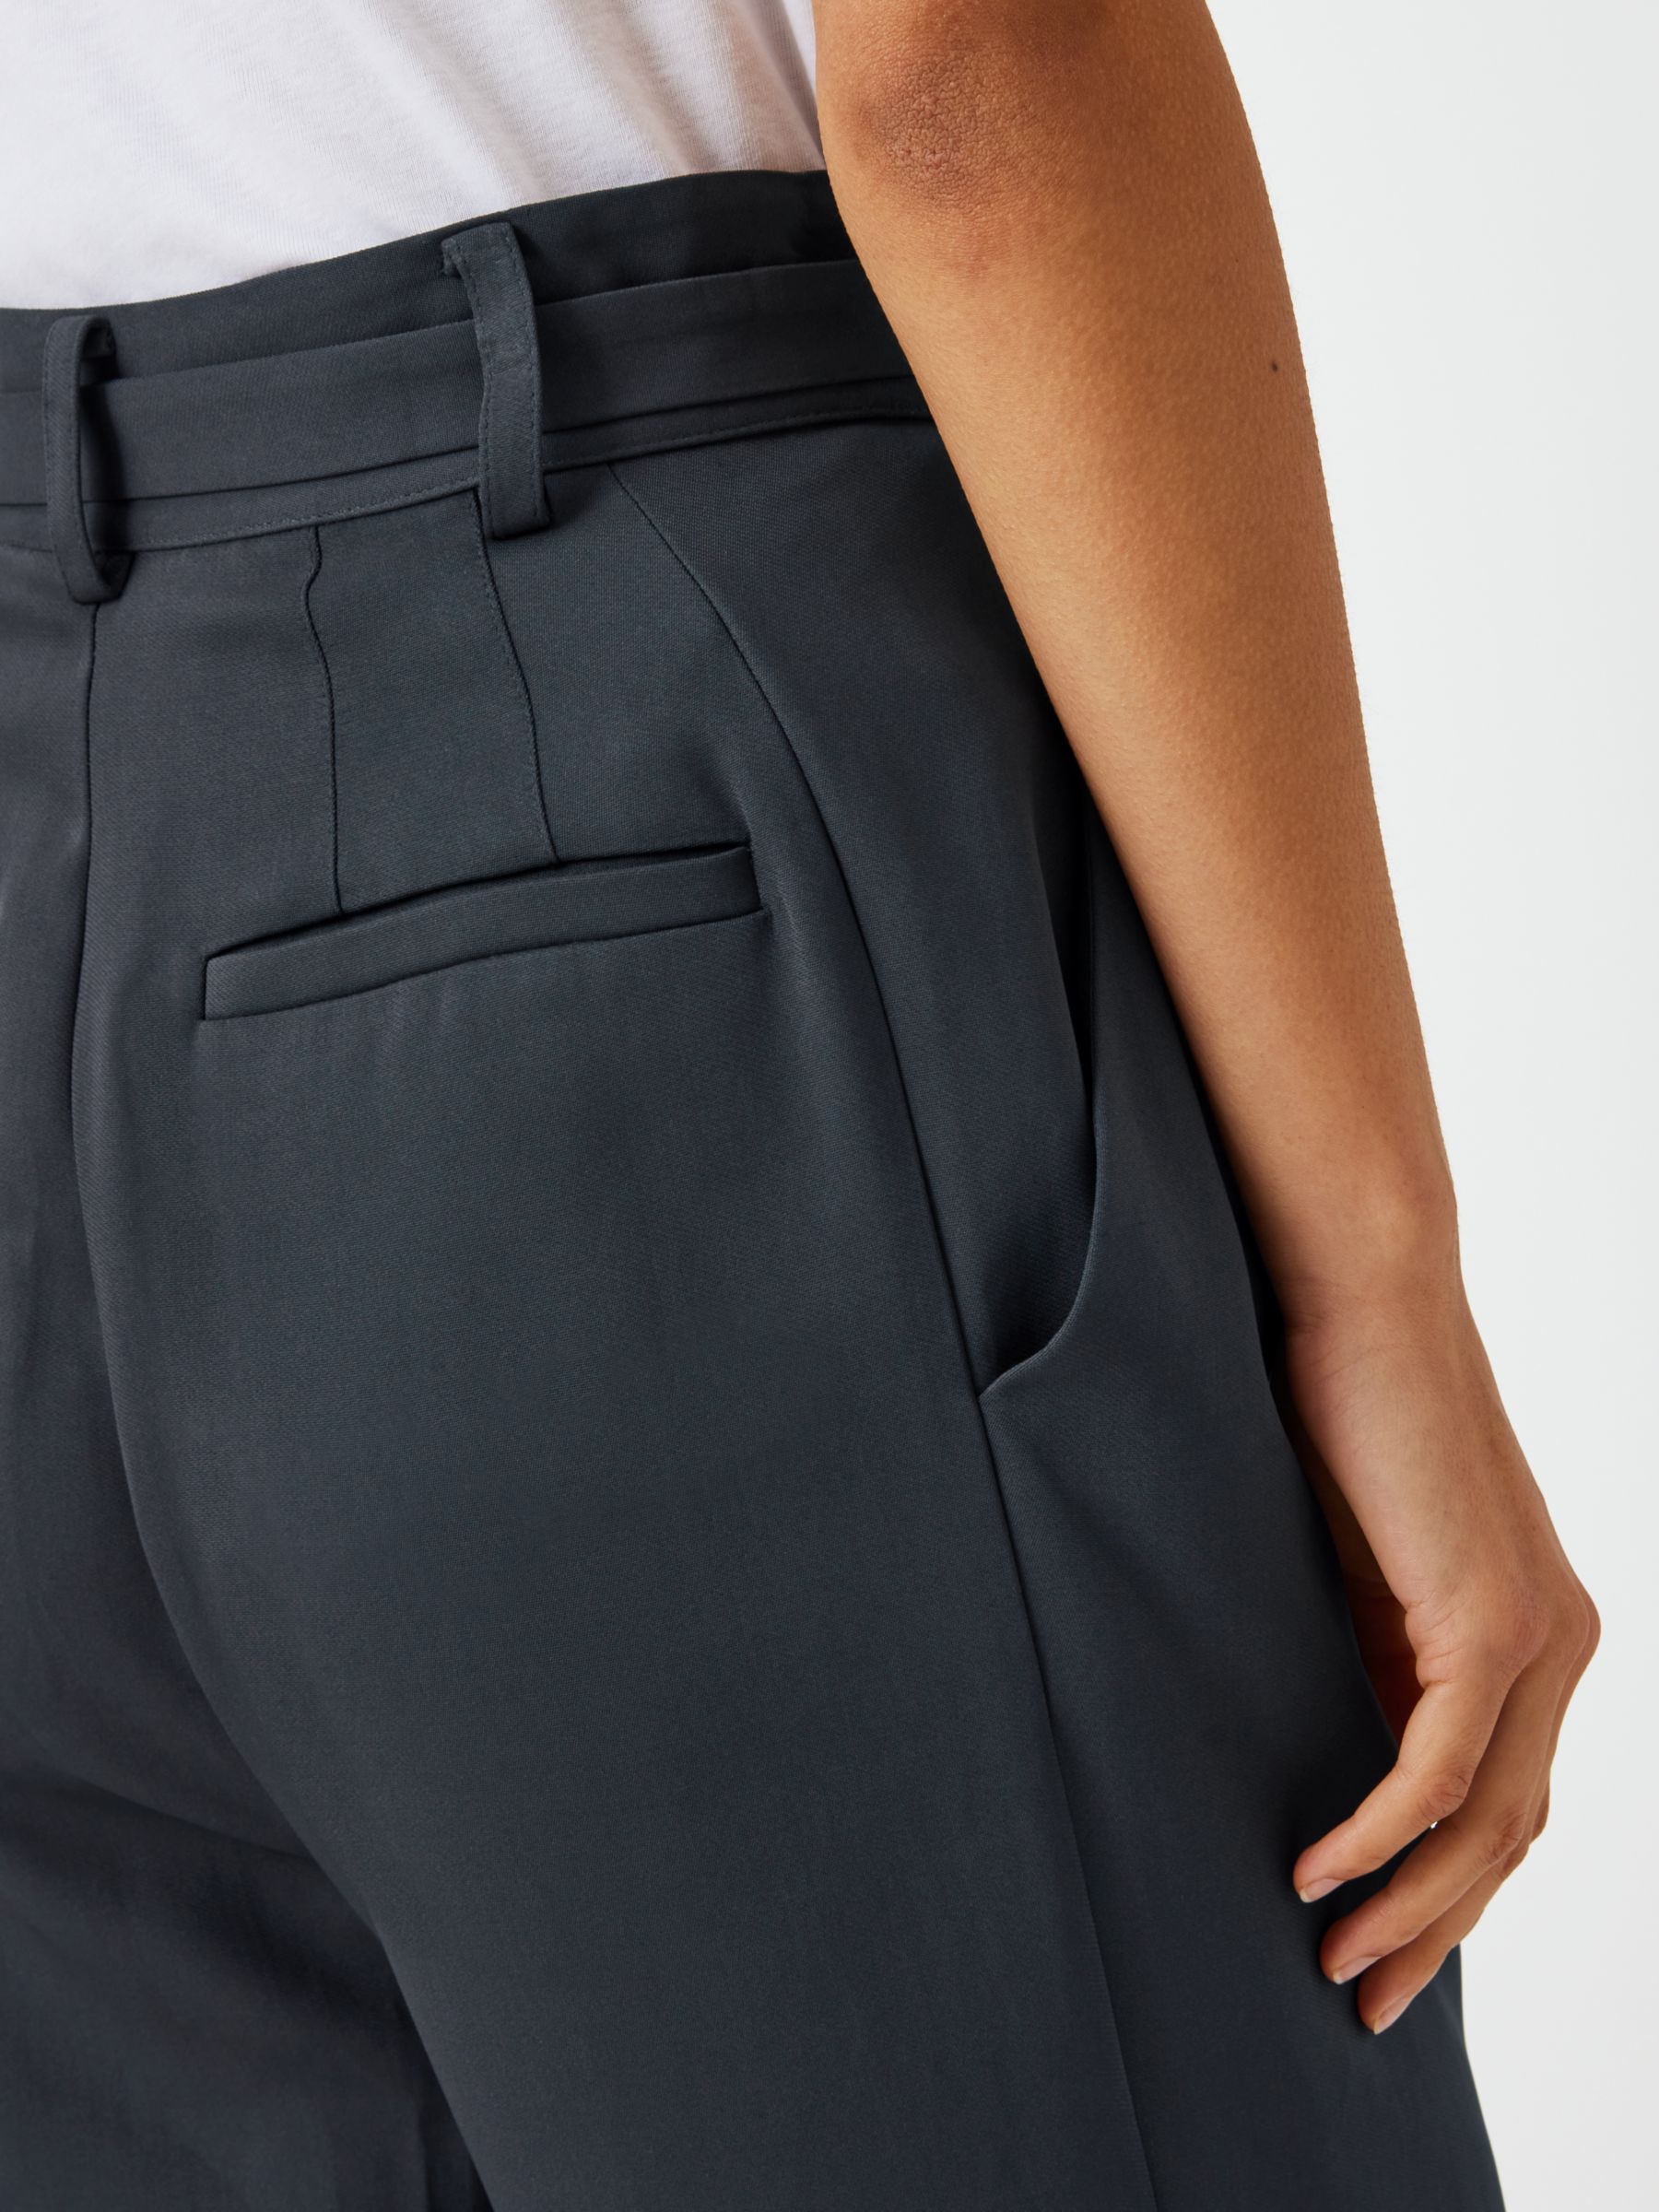 Buy Equipment Pietro Tailored Trousers, Obsidian Online at johnlewis.com